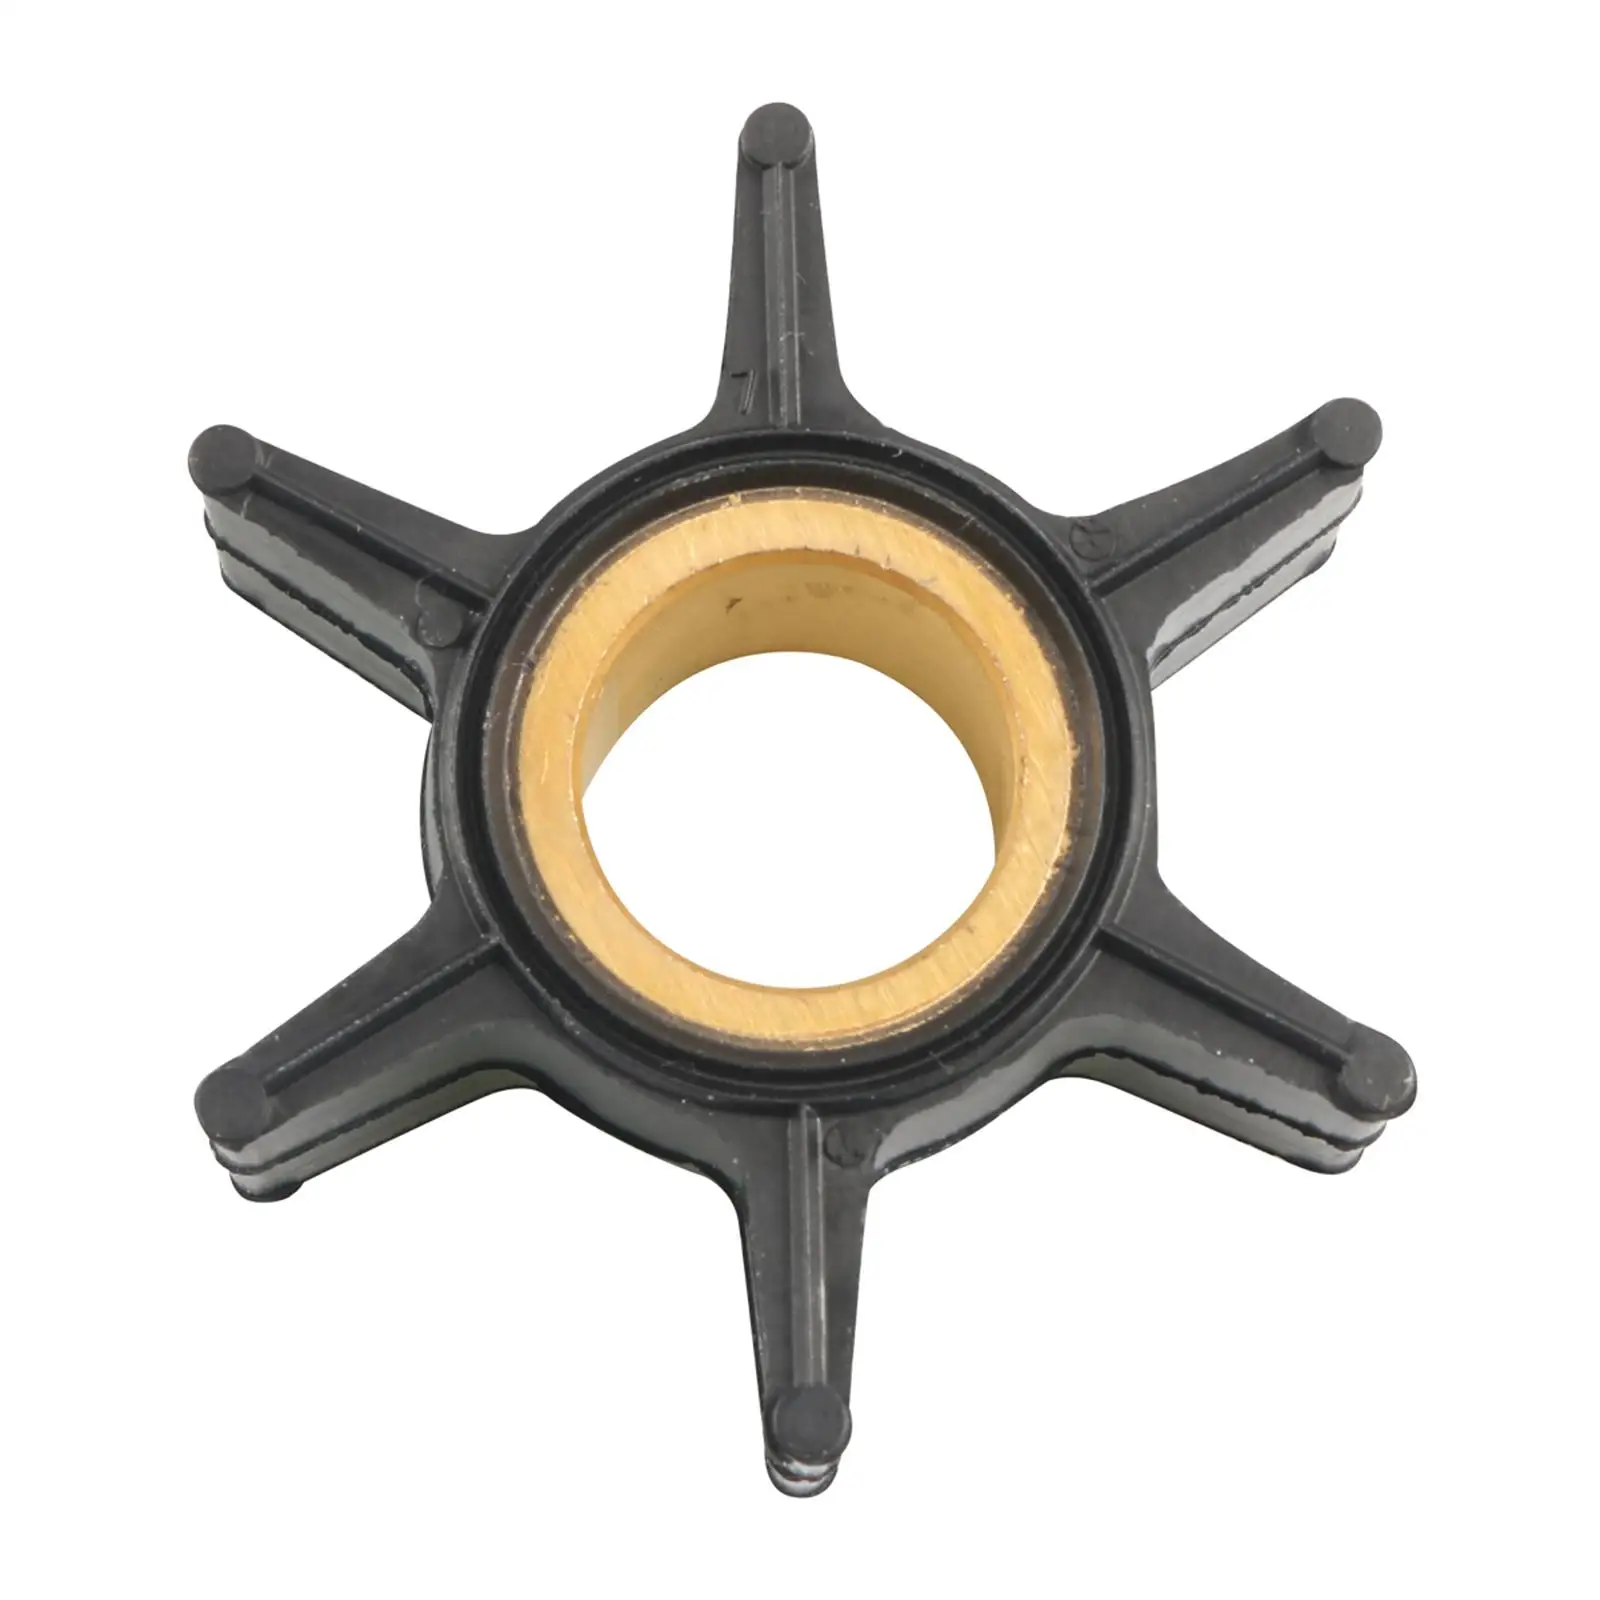 Water Pump Impeller Engine Parts Fit for   2 Stroke 20HP 25HP 28HP